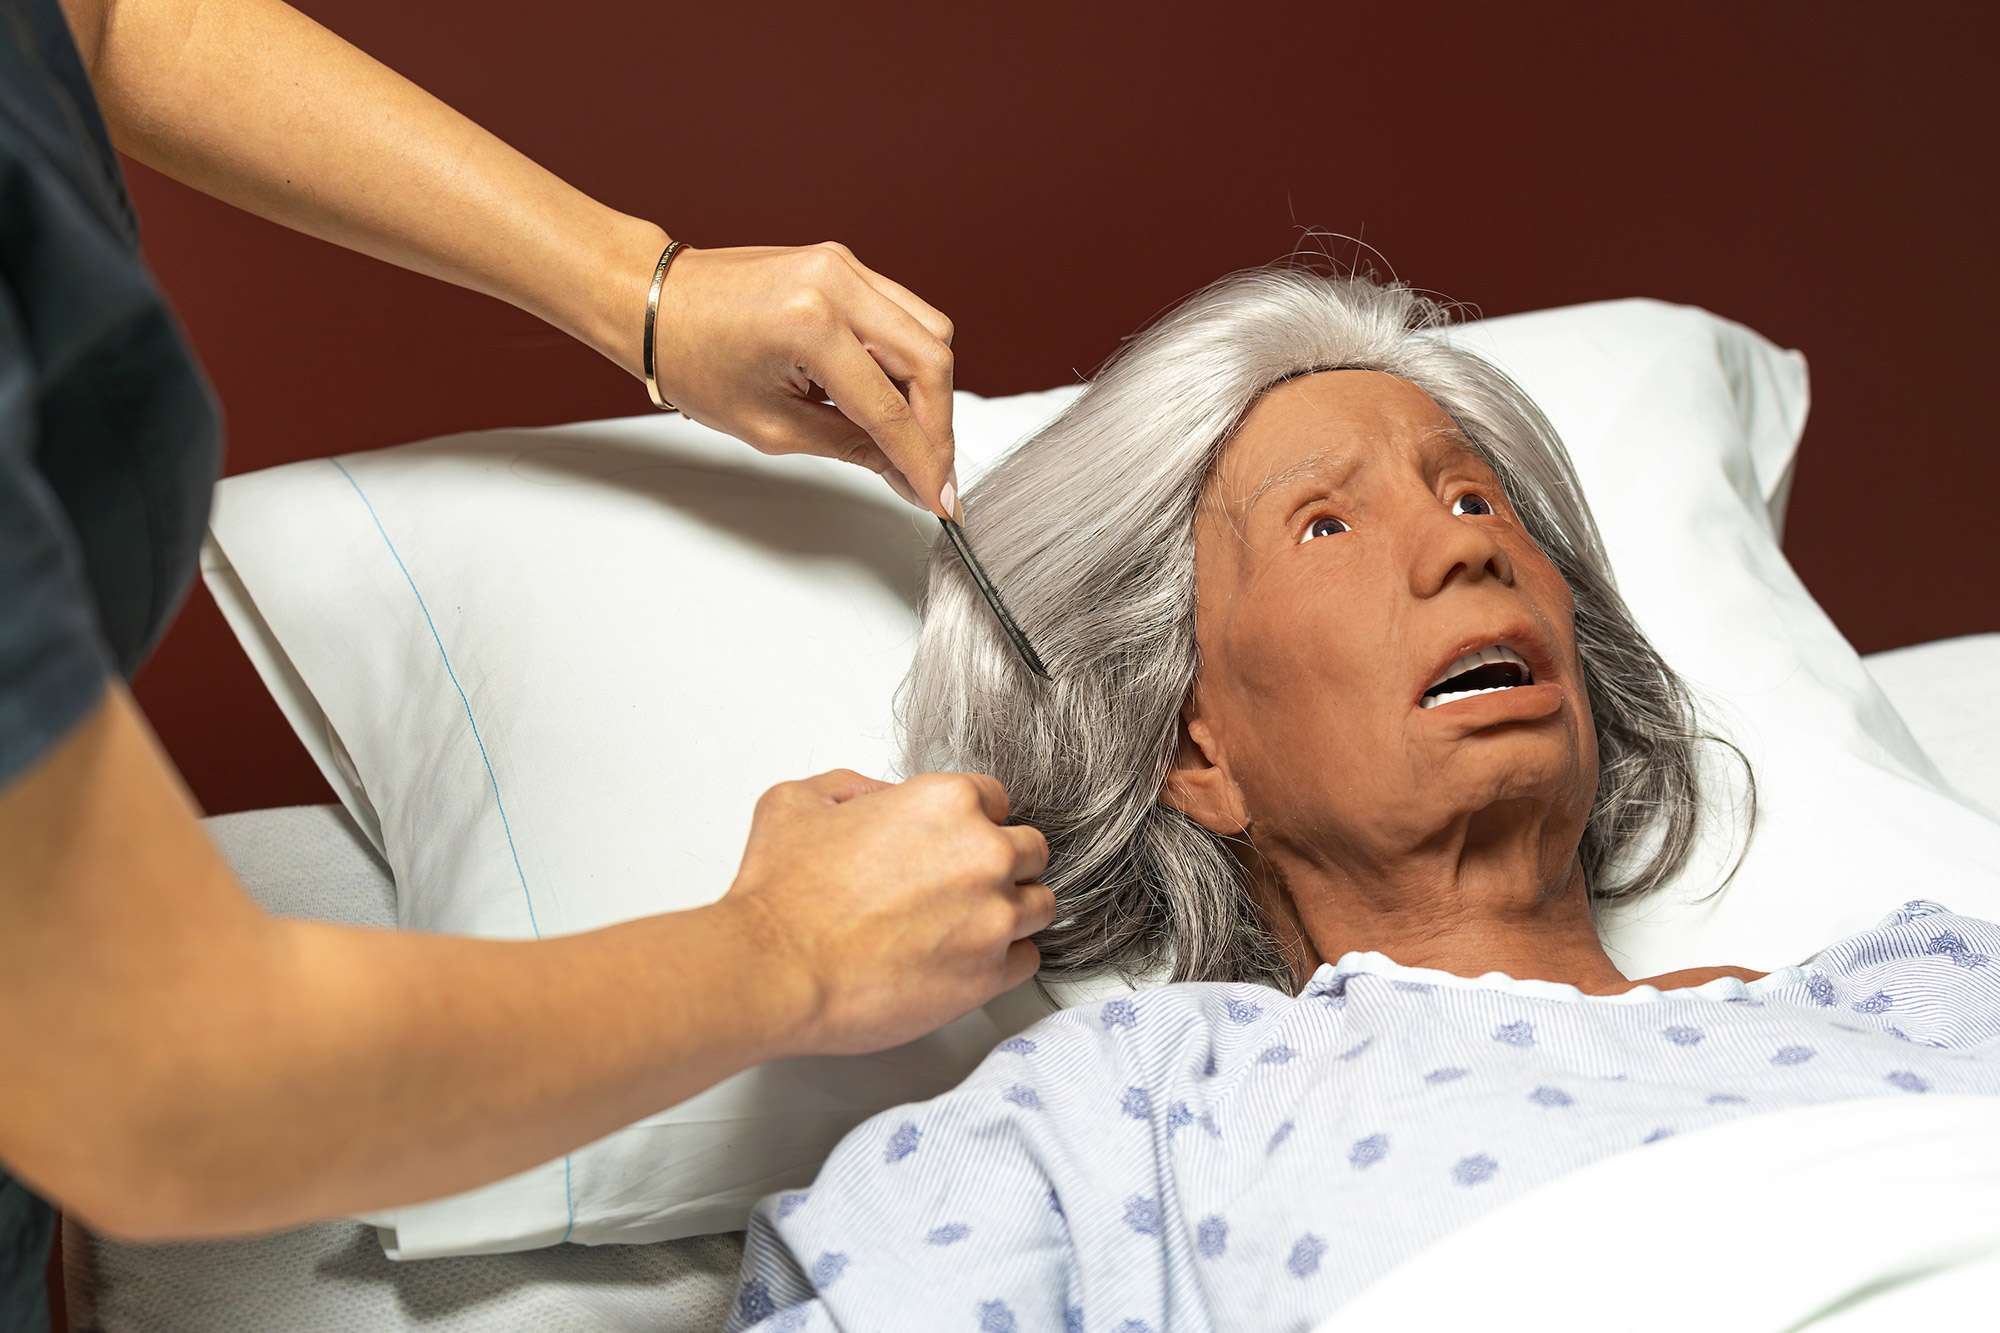 A Certified Nursing Assistant is combing the hair of a mannequin laying in a hospital bed.